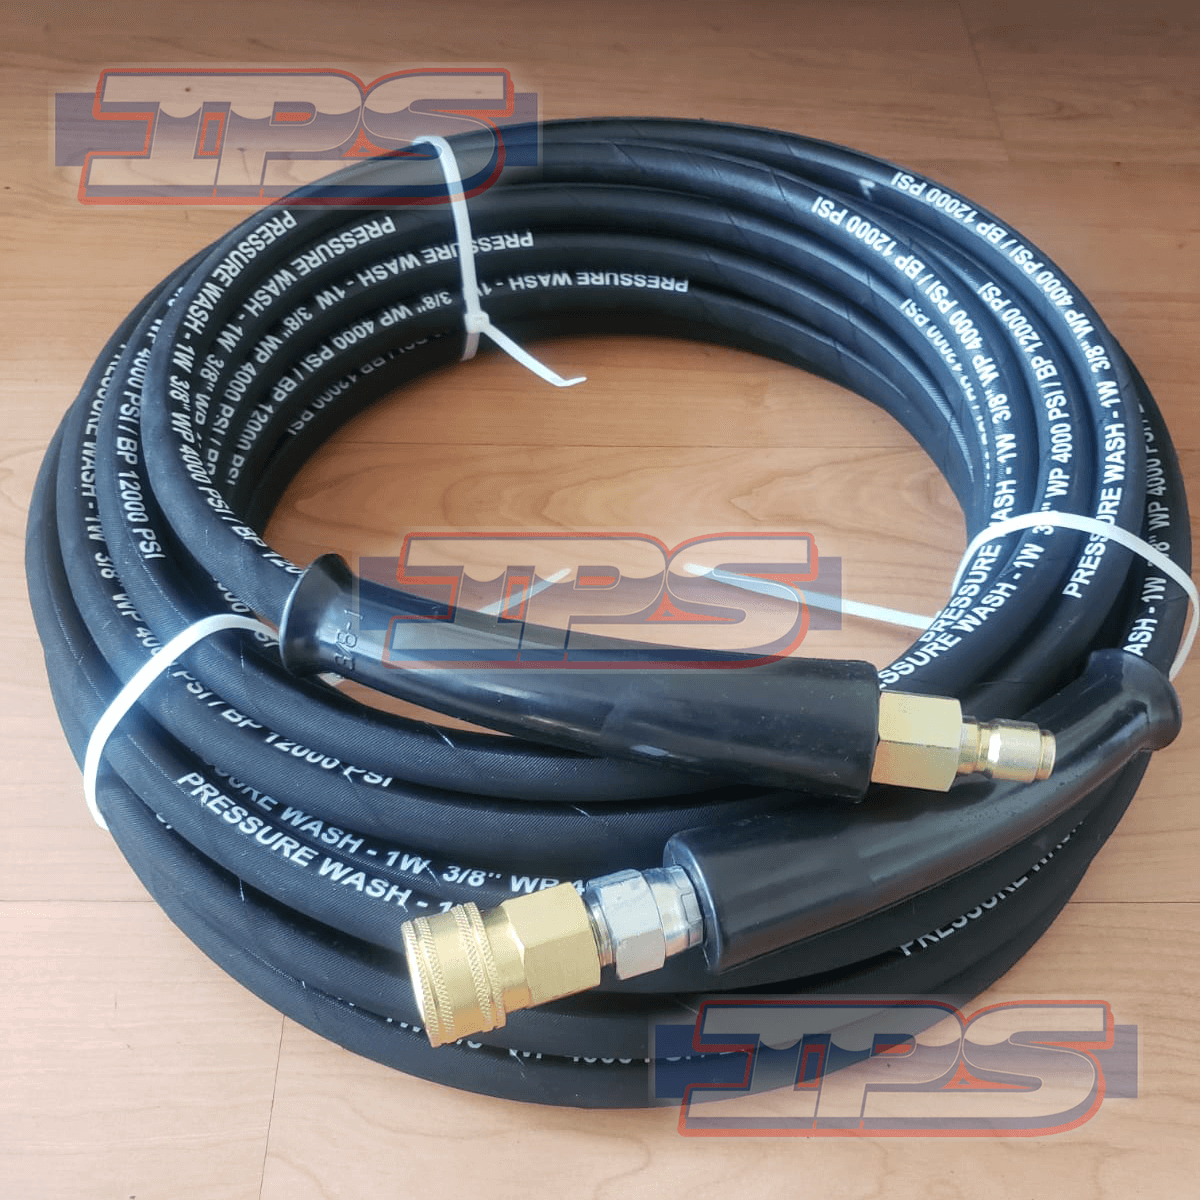 Quick Connect 3/8 Inch Power Washer Hose Kink Resistant 4000 PSI High Pressure Hose ABN Pressure Washer Hose 50 FT 